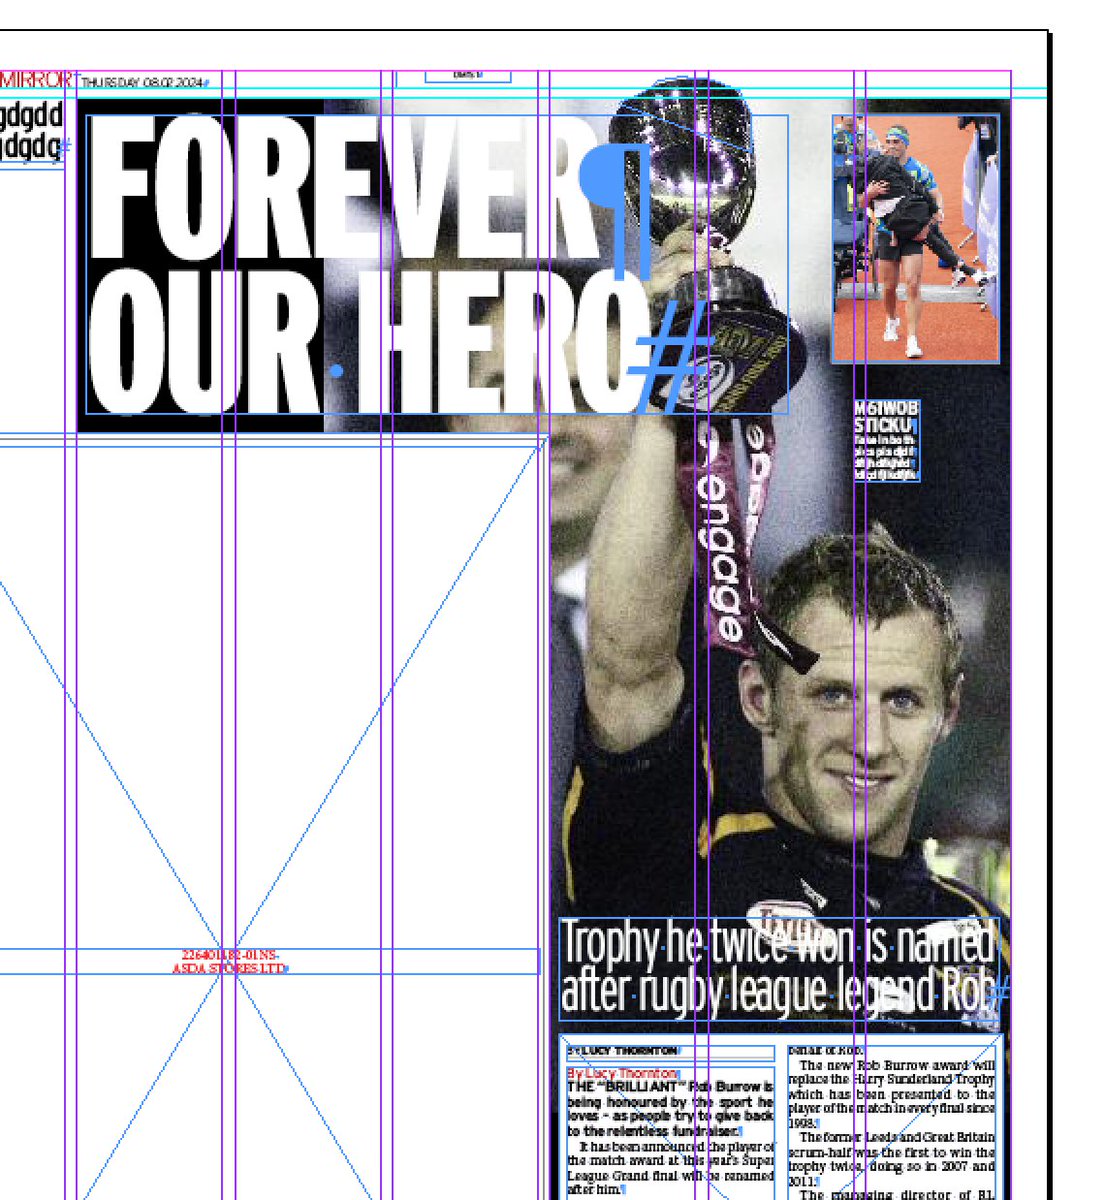 Putting together a page on Rob Burrow in news pages of tomorrow's @DailyMirror. He will be on sport pages too - cos you can never have too much of a good thing @TheRFL @Rob7Burrow @leedsrhinos @SuperLeague